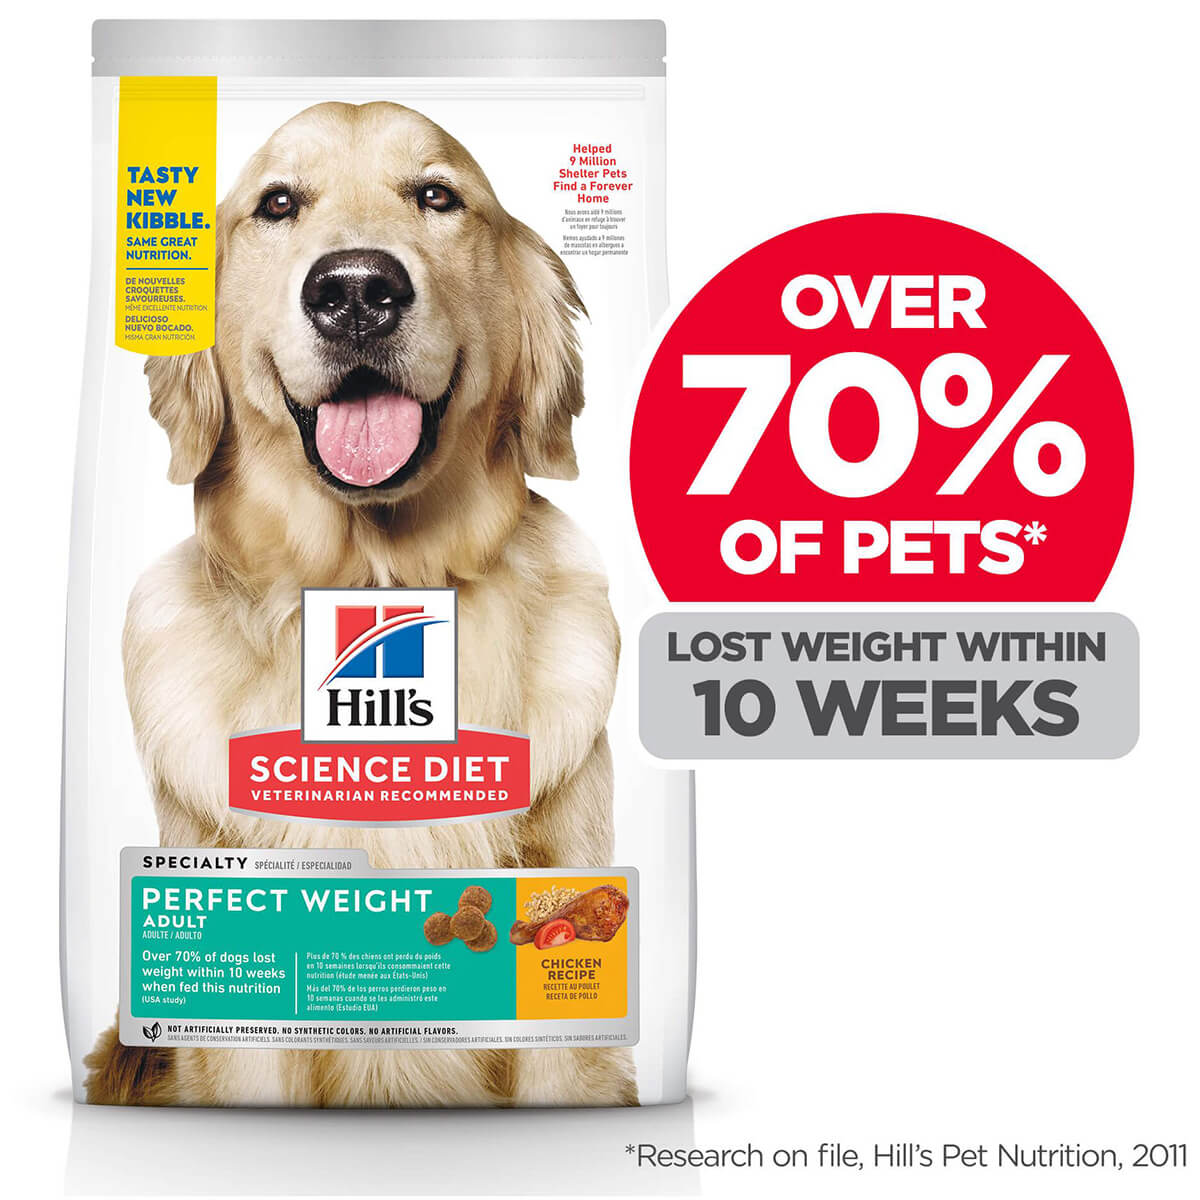 Hill's Science Diet Perfect Weight Adult Chicken Dry Dog Food (100000012202) [default_color]